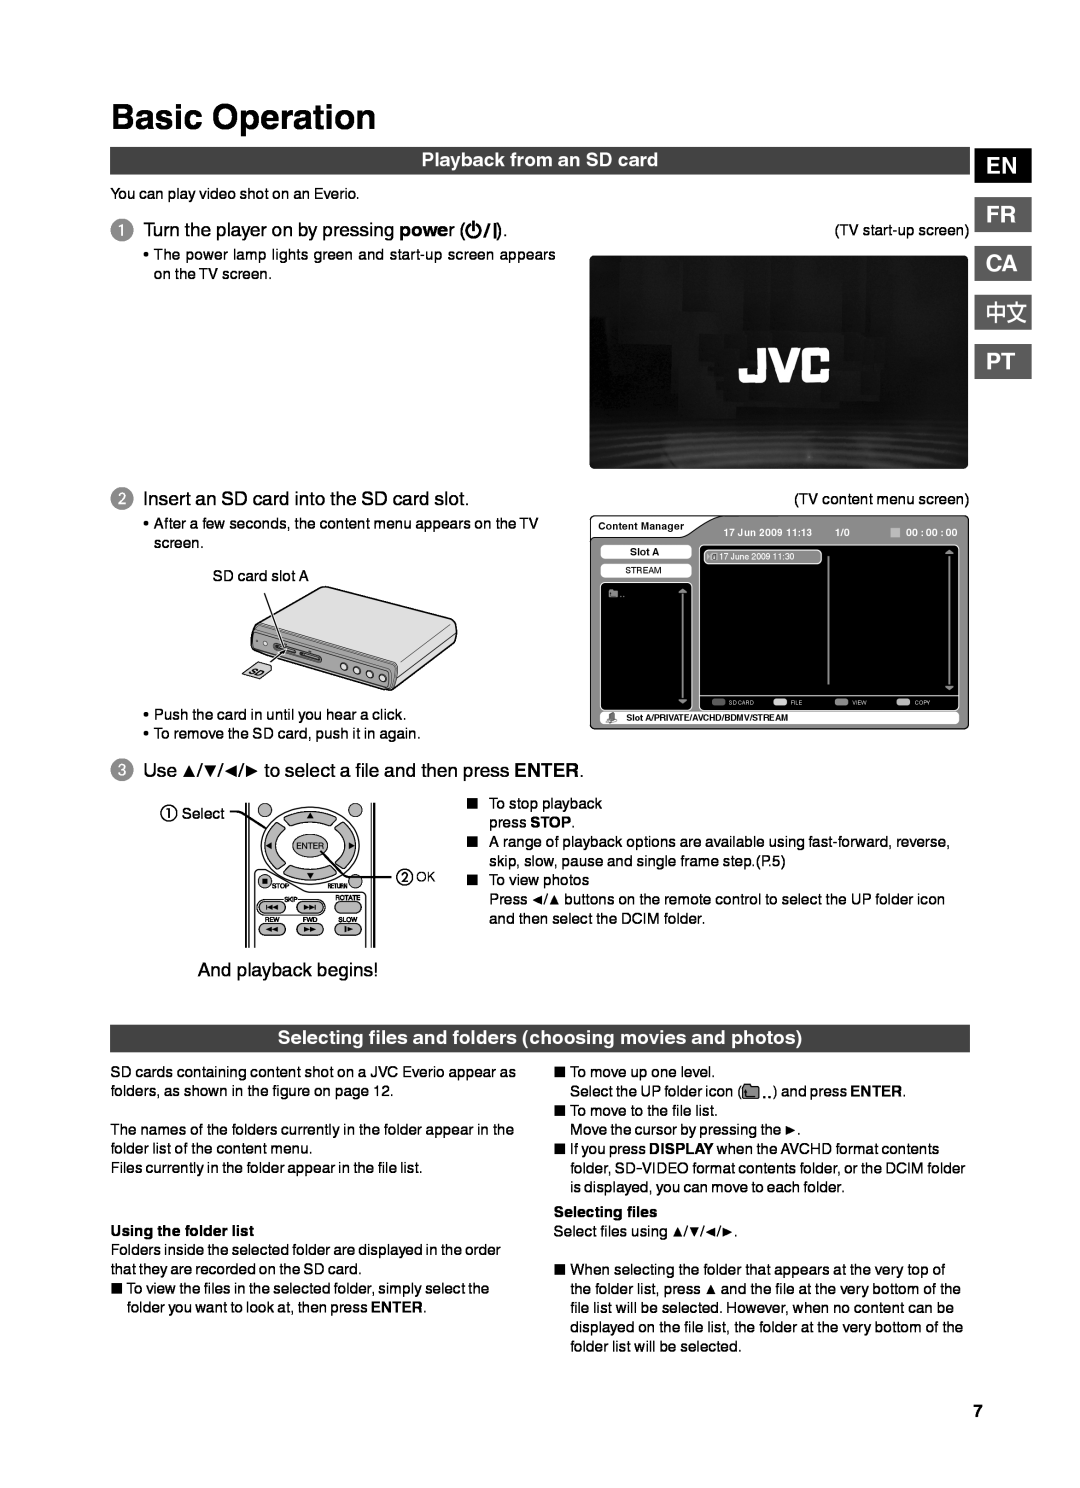 JVC CU-VS100U Basic Operation, Playback from an SD card, ➊ Turn the player on by pressing power, And playback begins 